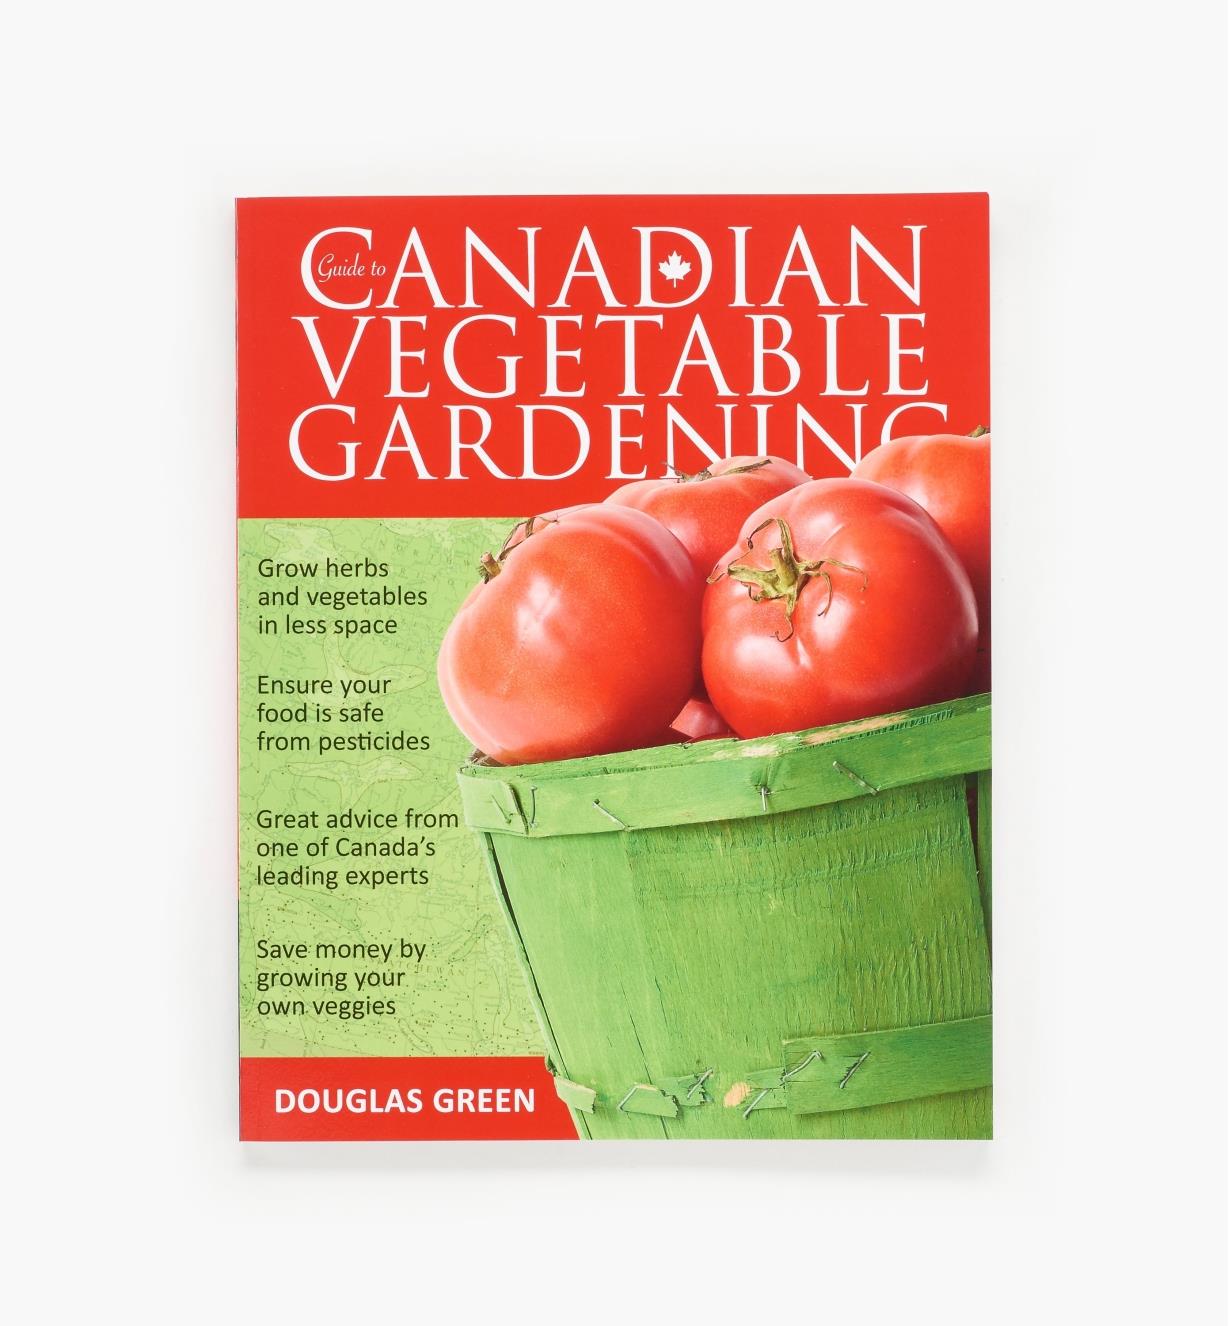 LA766 - Guide to Canadian Vegetable Gardening